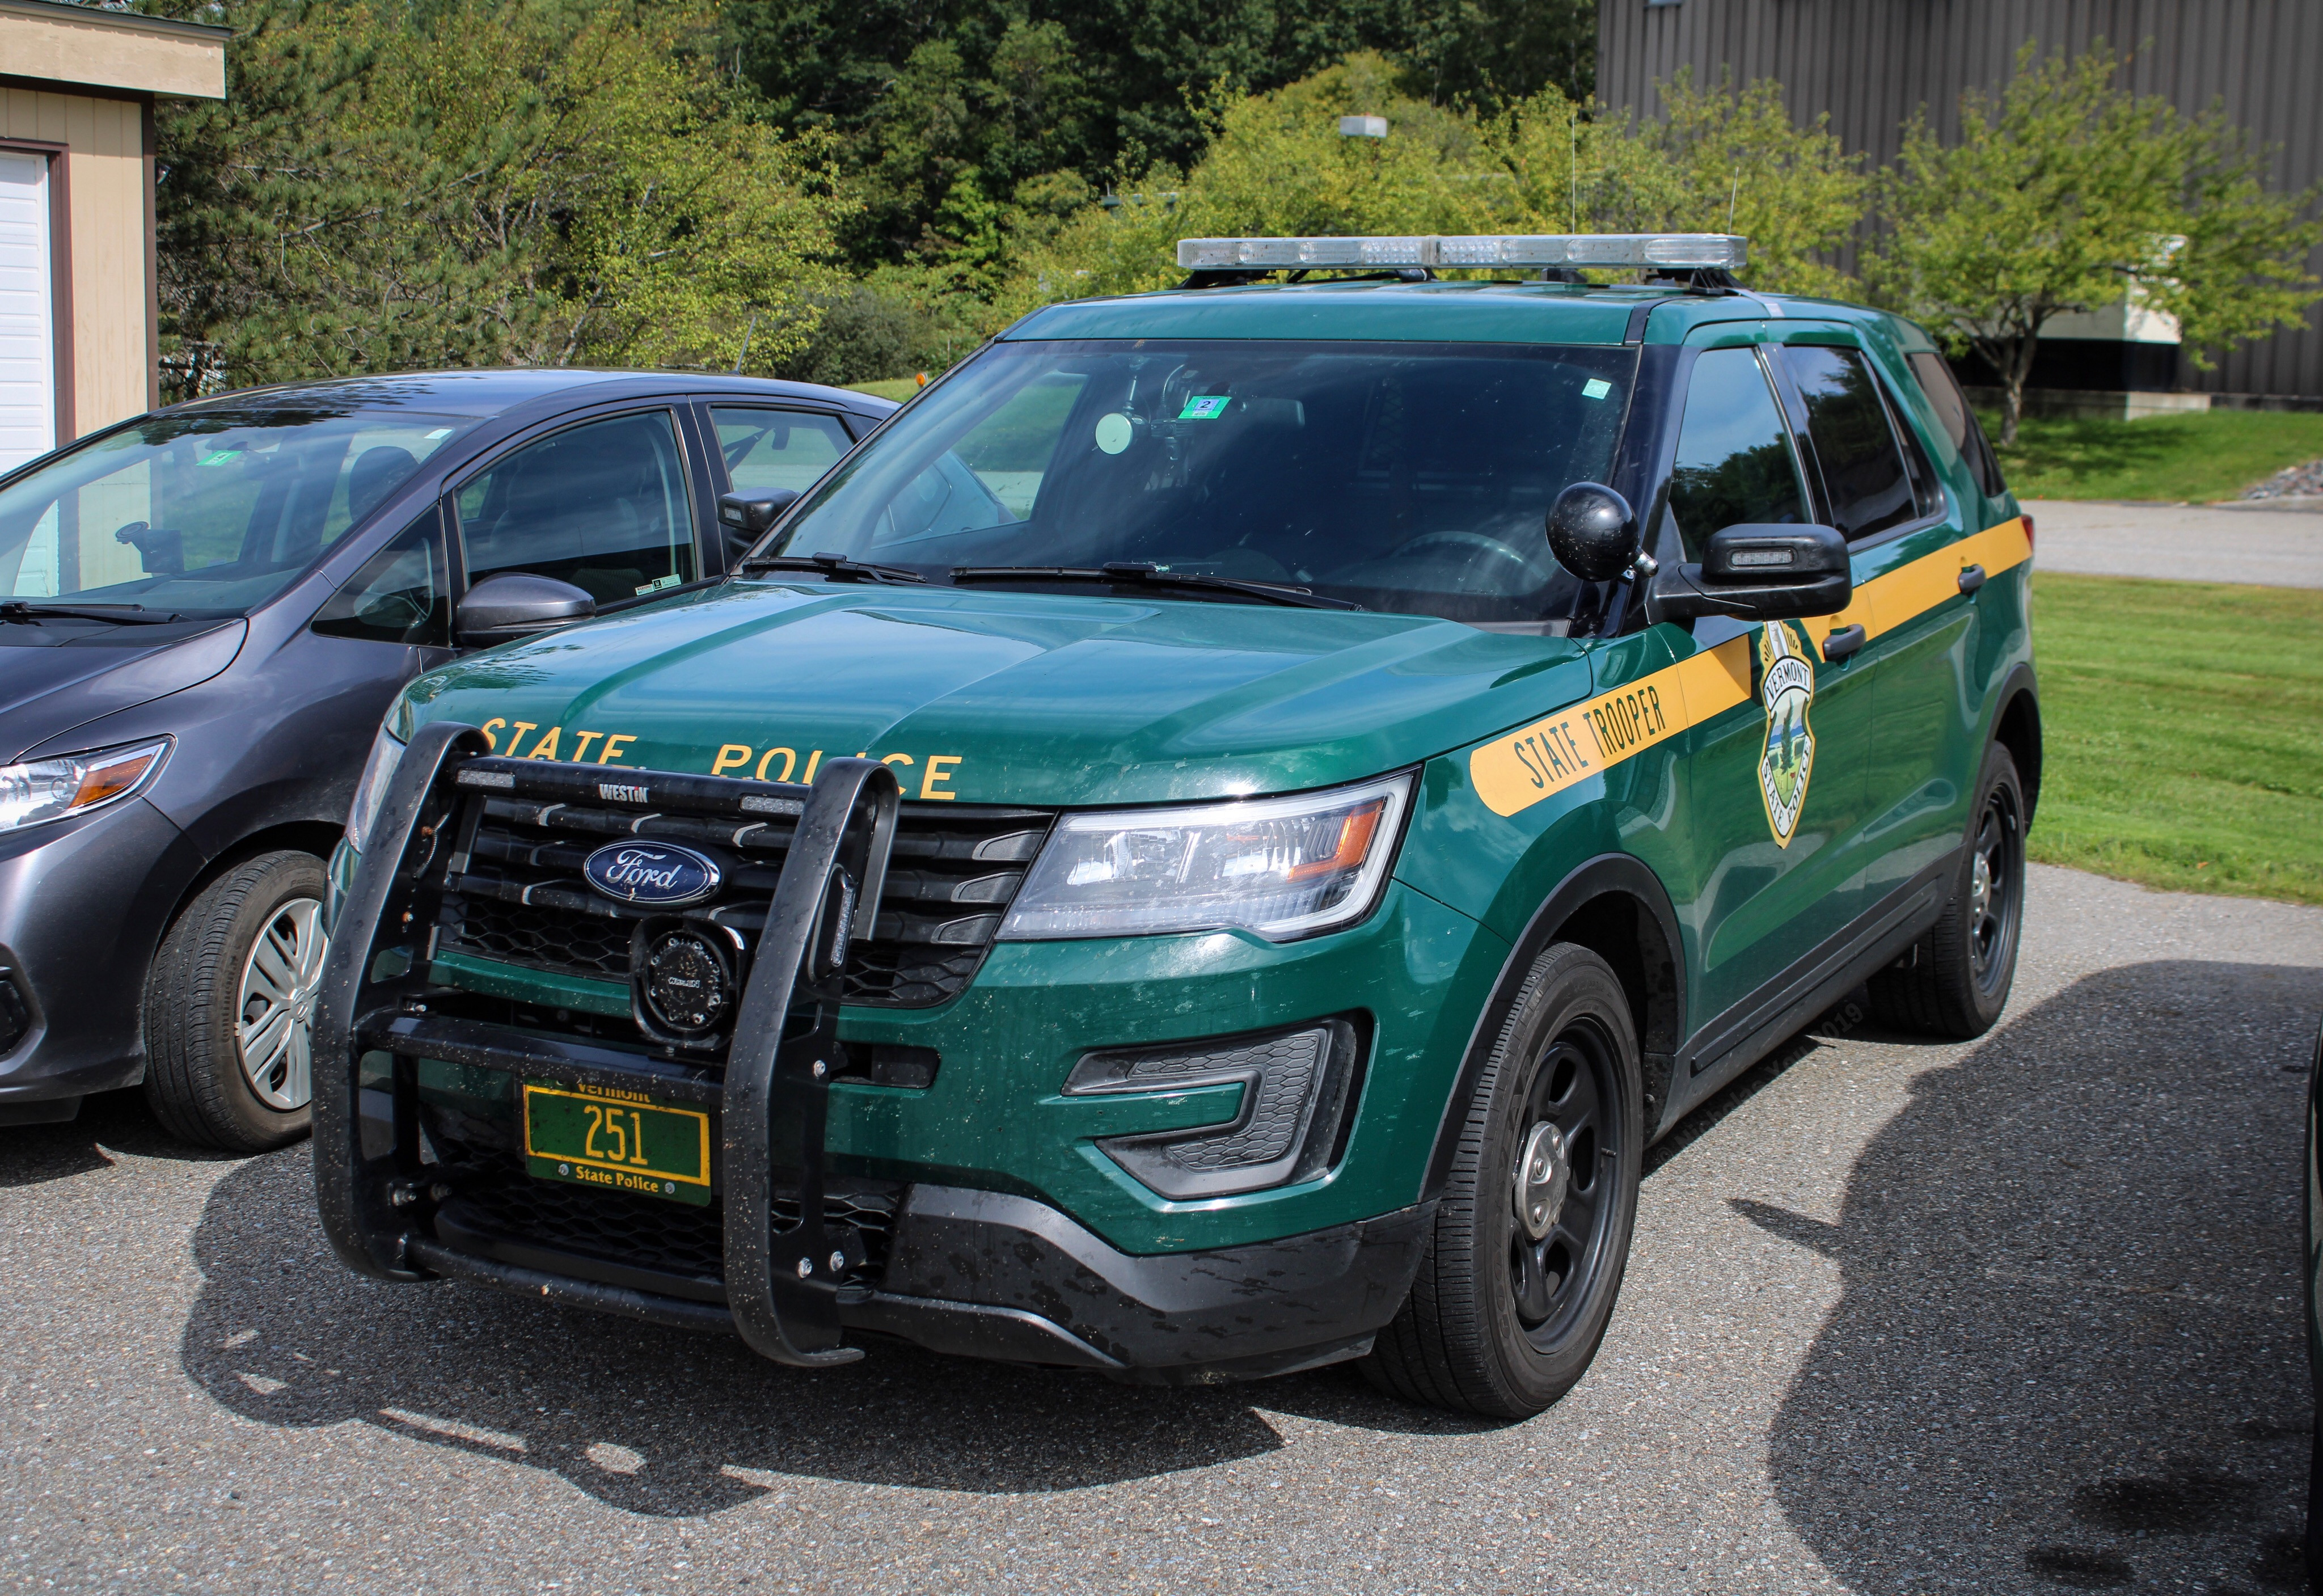 A photo  of Vermont State Police
            Cruiser 251, a 2016-2019 Ford Police Interceptor Utility             taken by Nicholas You